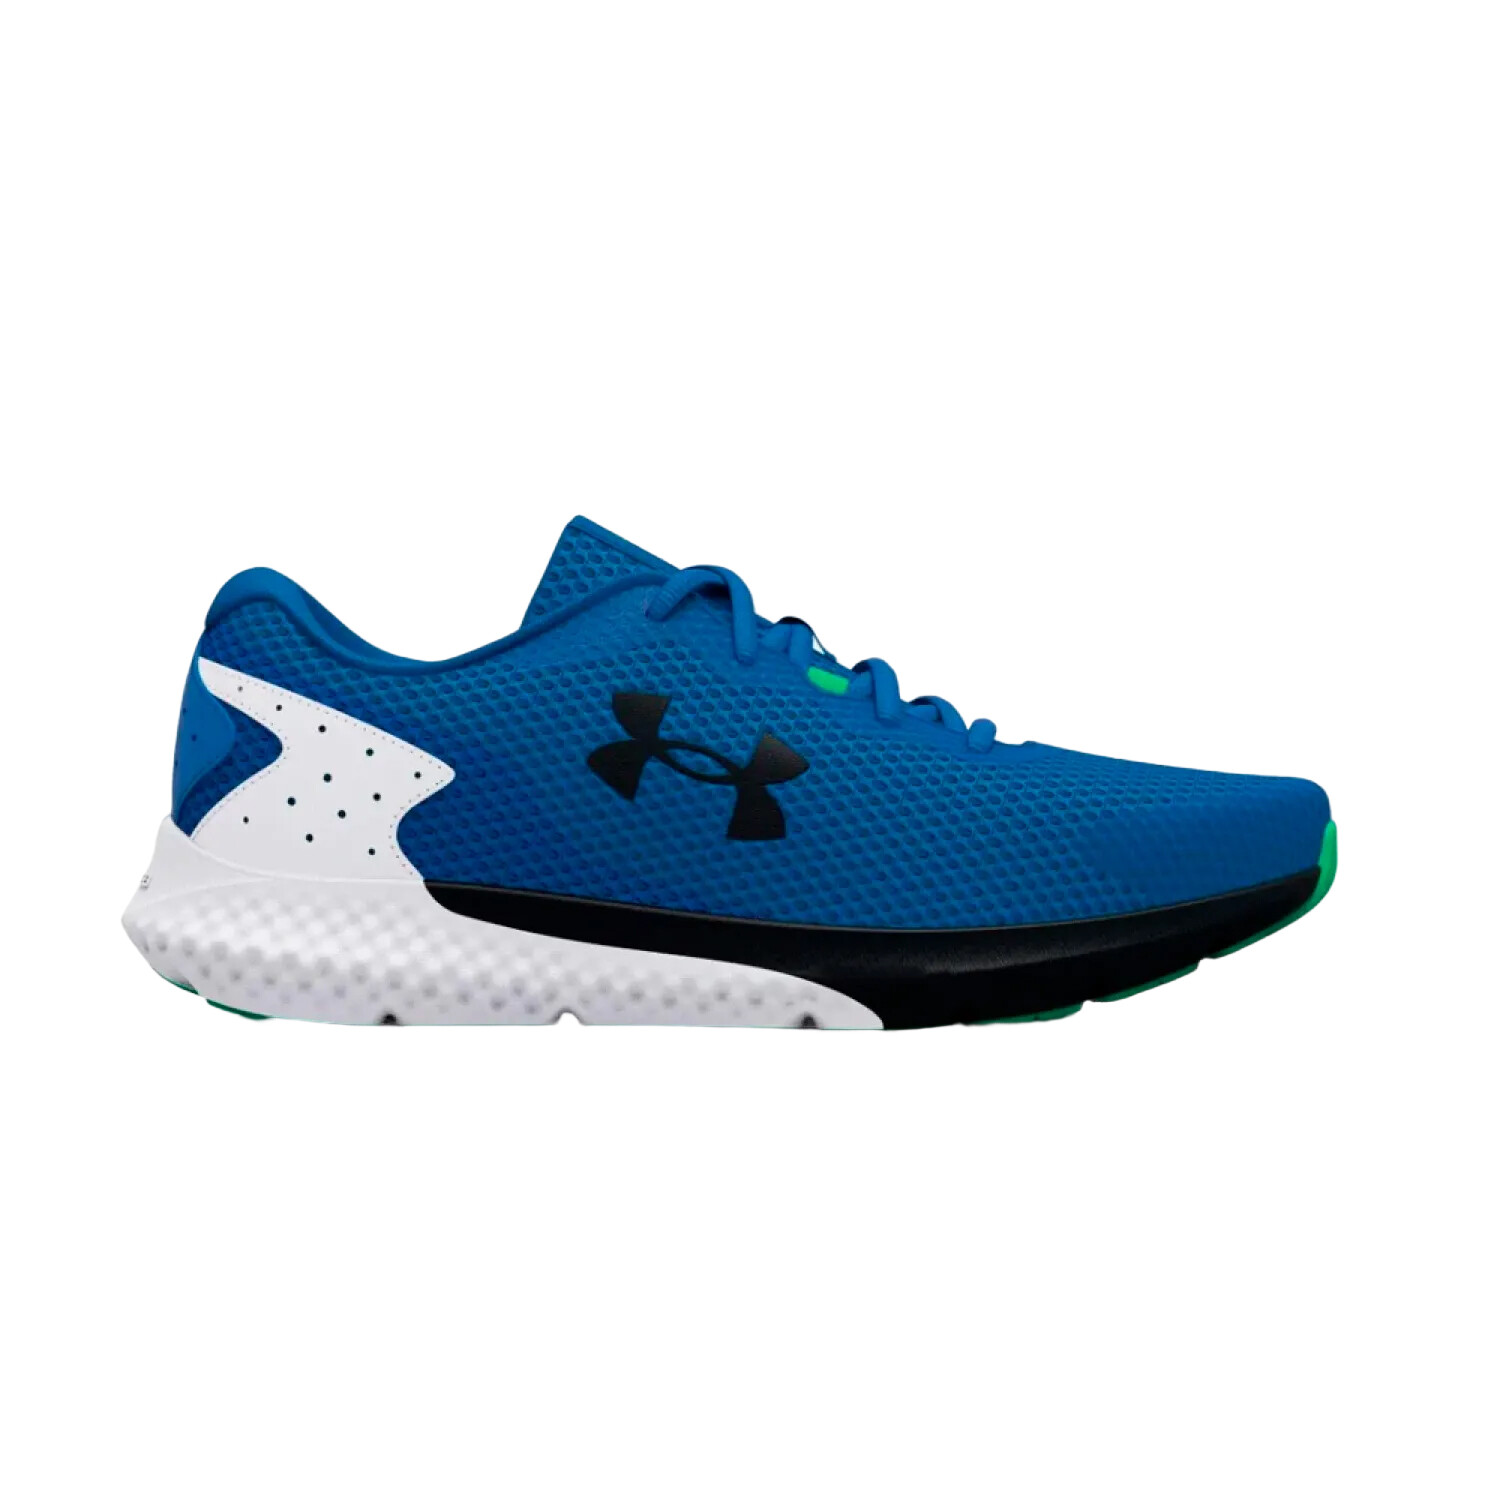 Tenis Under Armour Charged Rogue 3 de mujer para correr